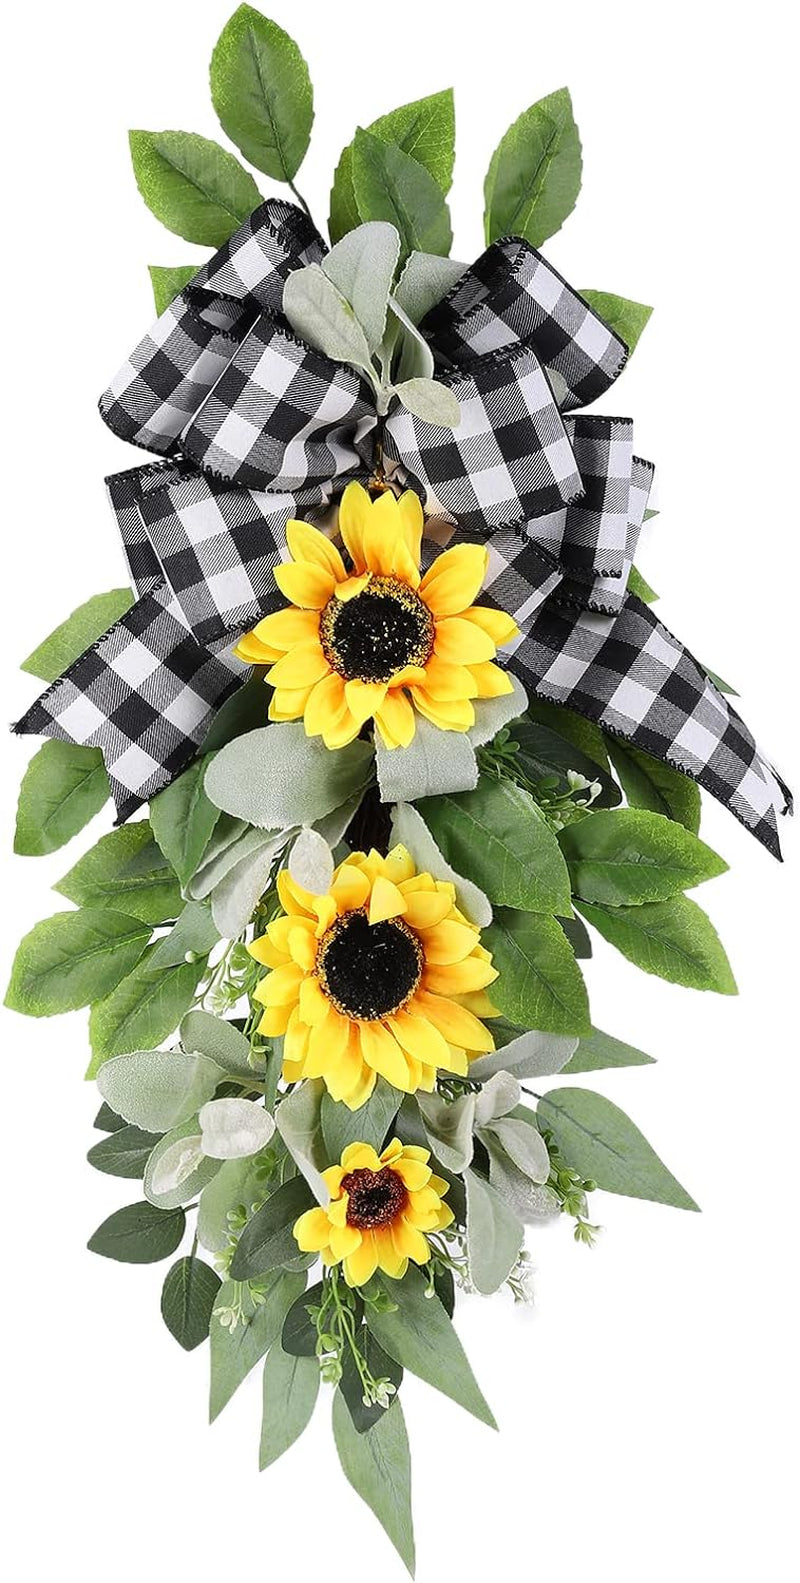 Autumn Sunflower Swag for Front Door, Floral Large Spring Summer Door Swag Wreath, Artificial Flowers and Green Leaves Wreath Decor, Welcome Wreath for Home Porch Farmhouse